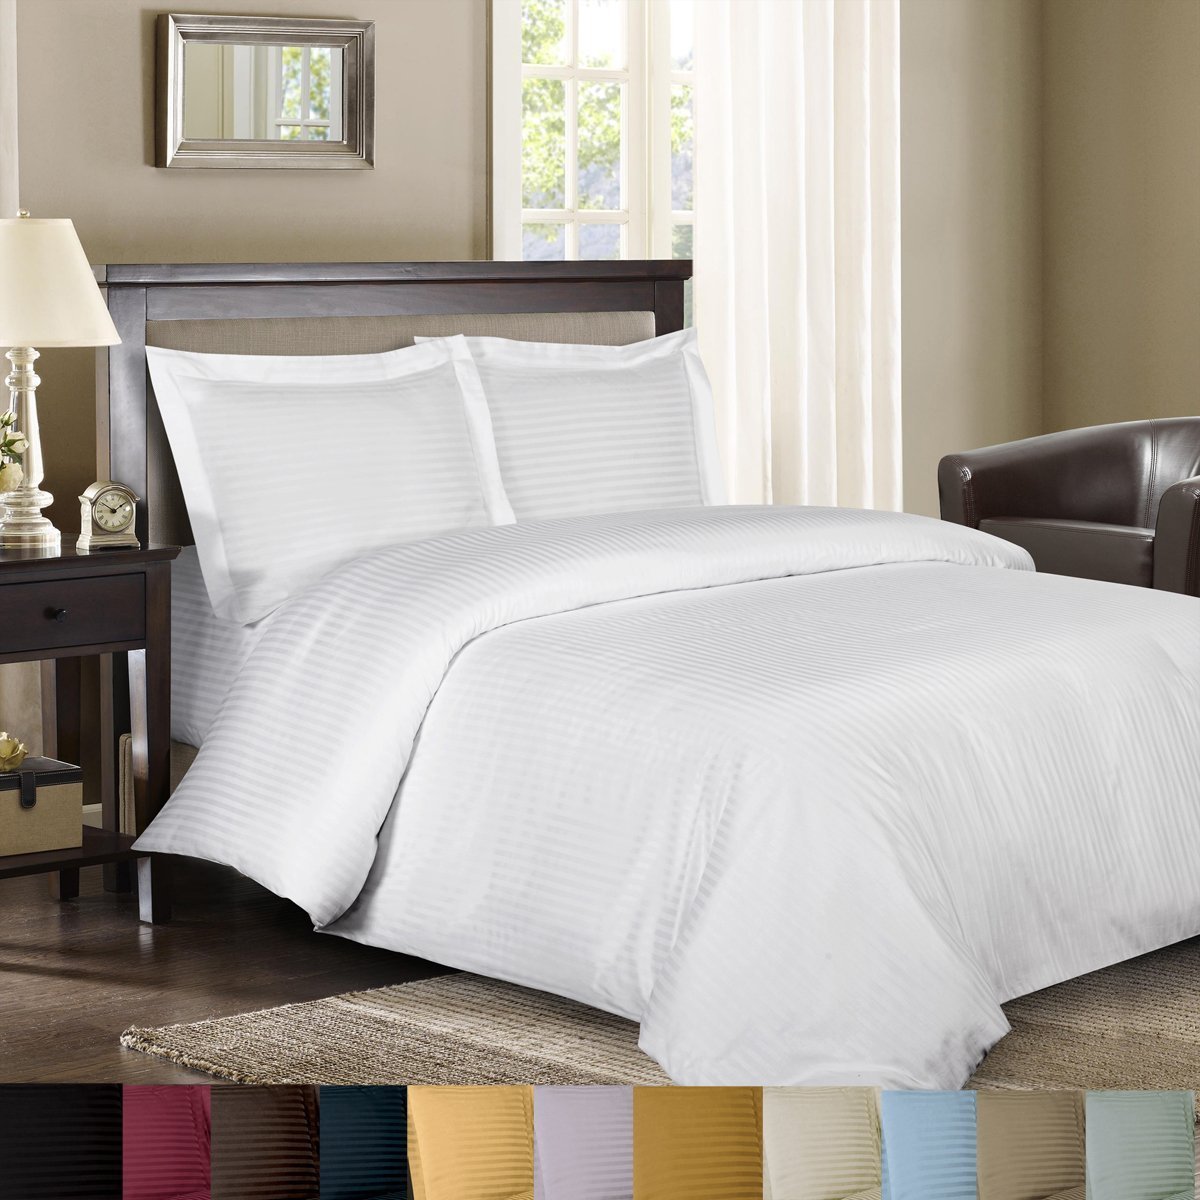 Royal Hotel Sateen Striped 300-Thread-Count 3-Piece Cotton King Duvet-Cover Set, White